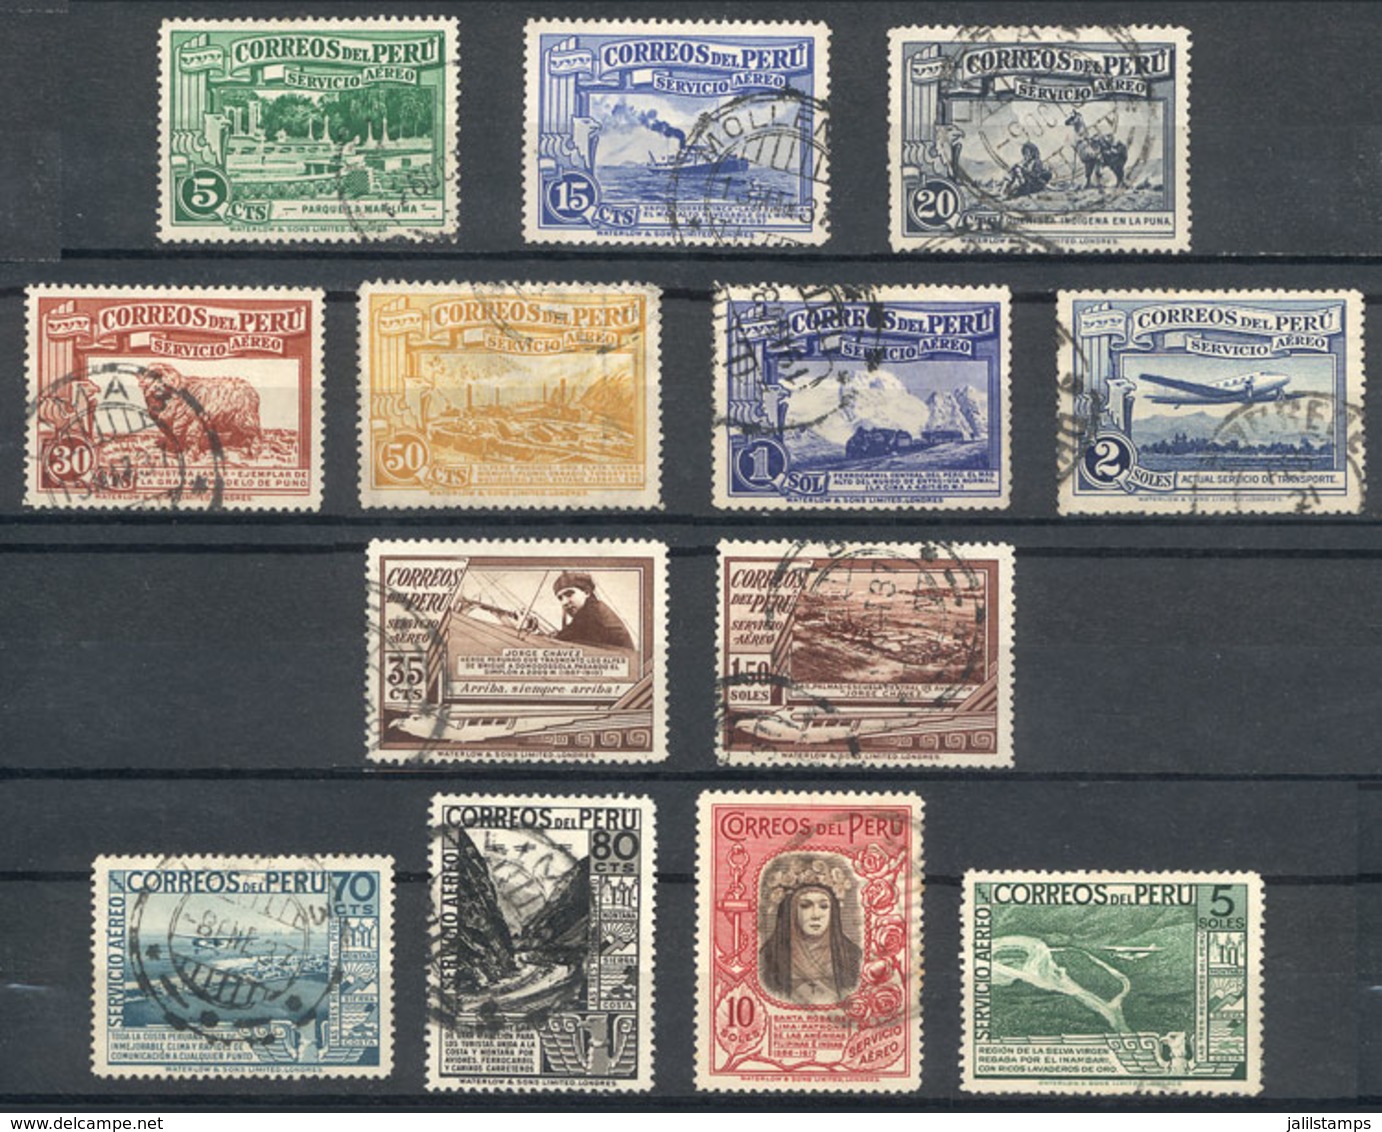 PERU: Sc.C16 + Other Values (Yvert 16/28), 1936 Complete Set Of 13 Used Values, Fine To Very Fine Quality, Yvert Catalog - Perú